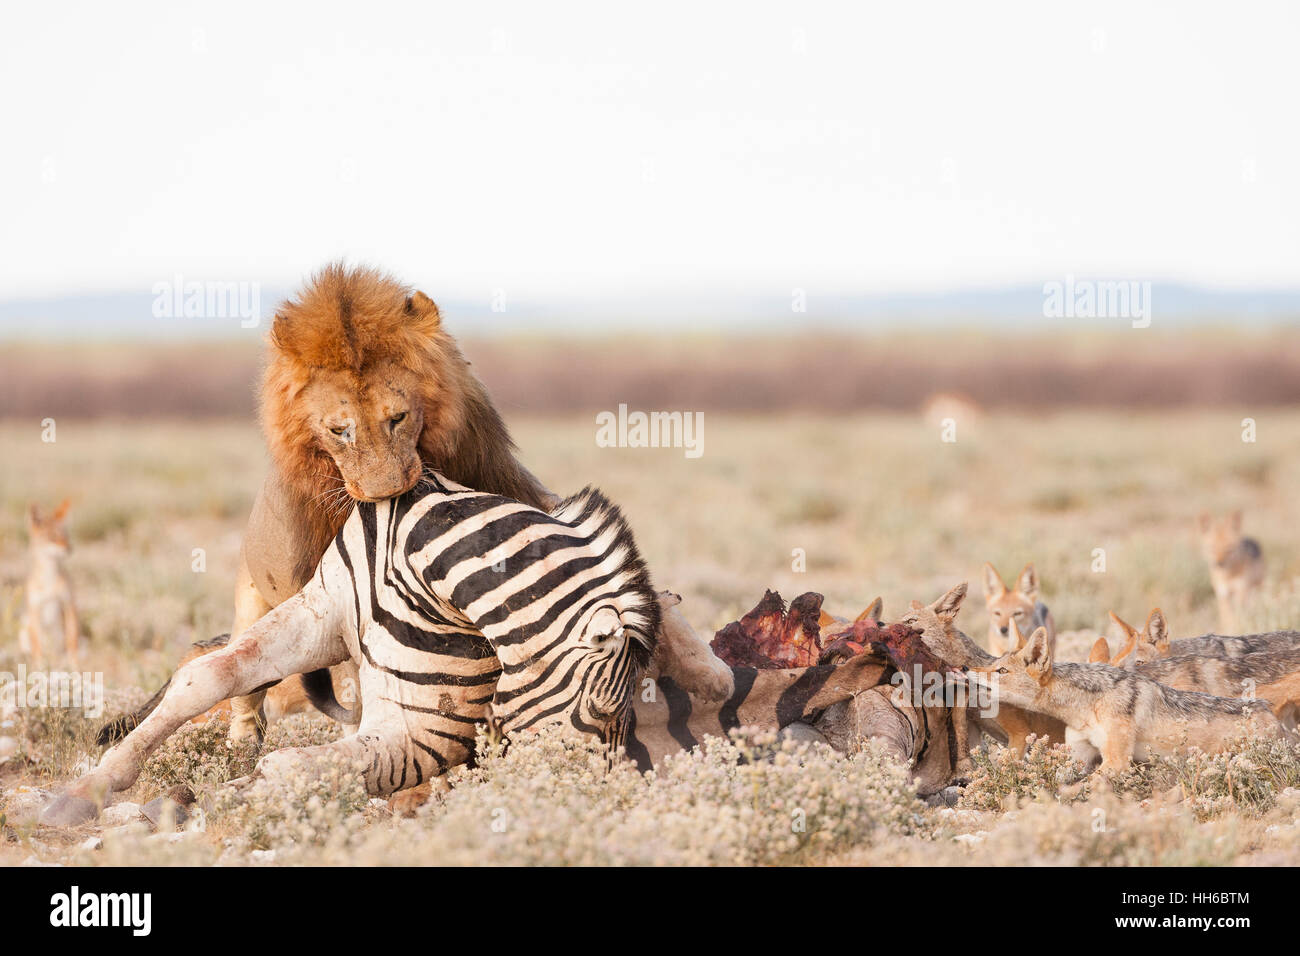 Etosha National Park, Namibia. A large male lion picks up a dead zebra and moves it away from watching black-backed jackals. Stock Photo